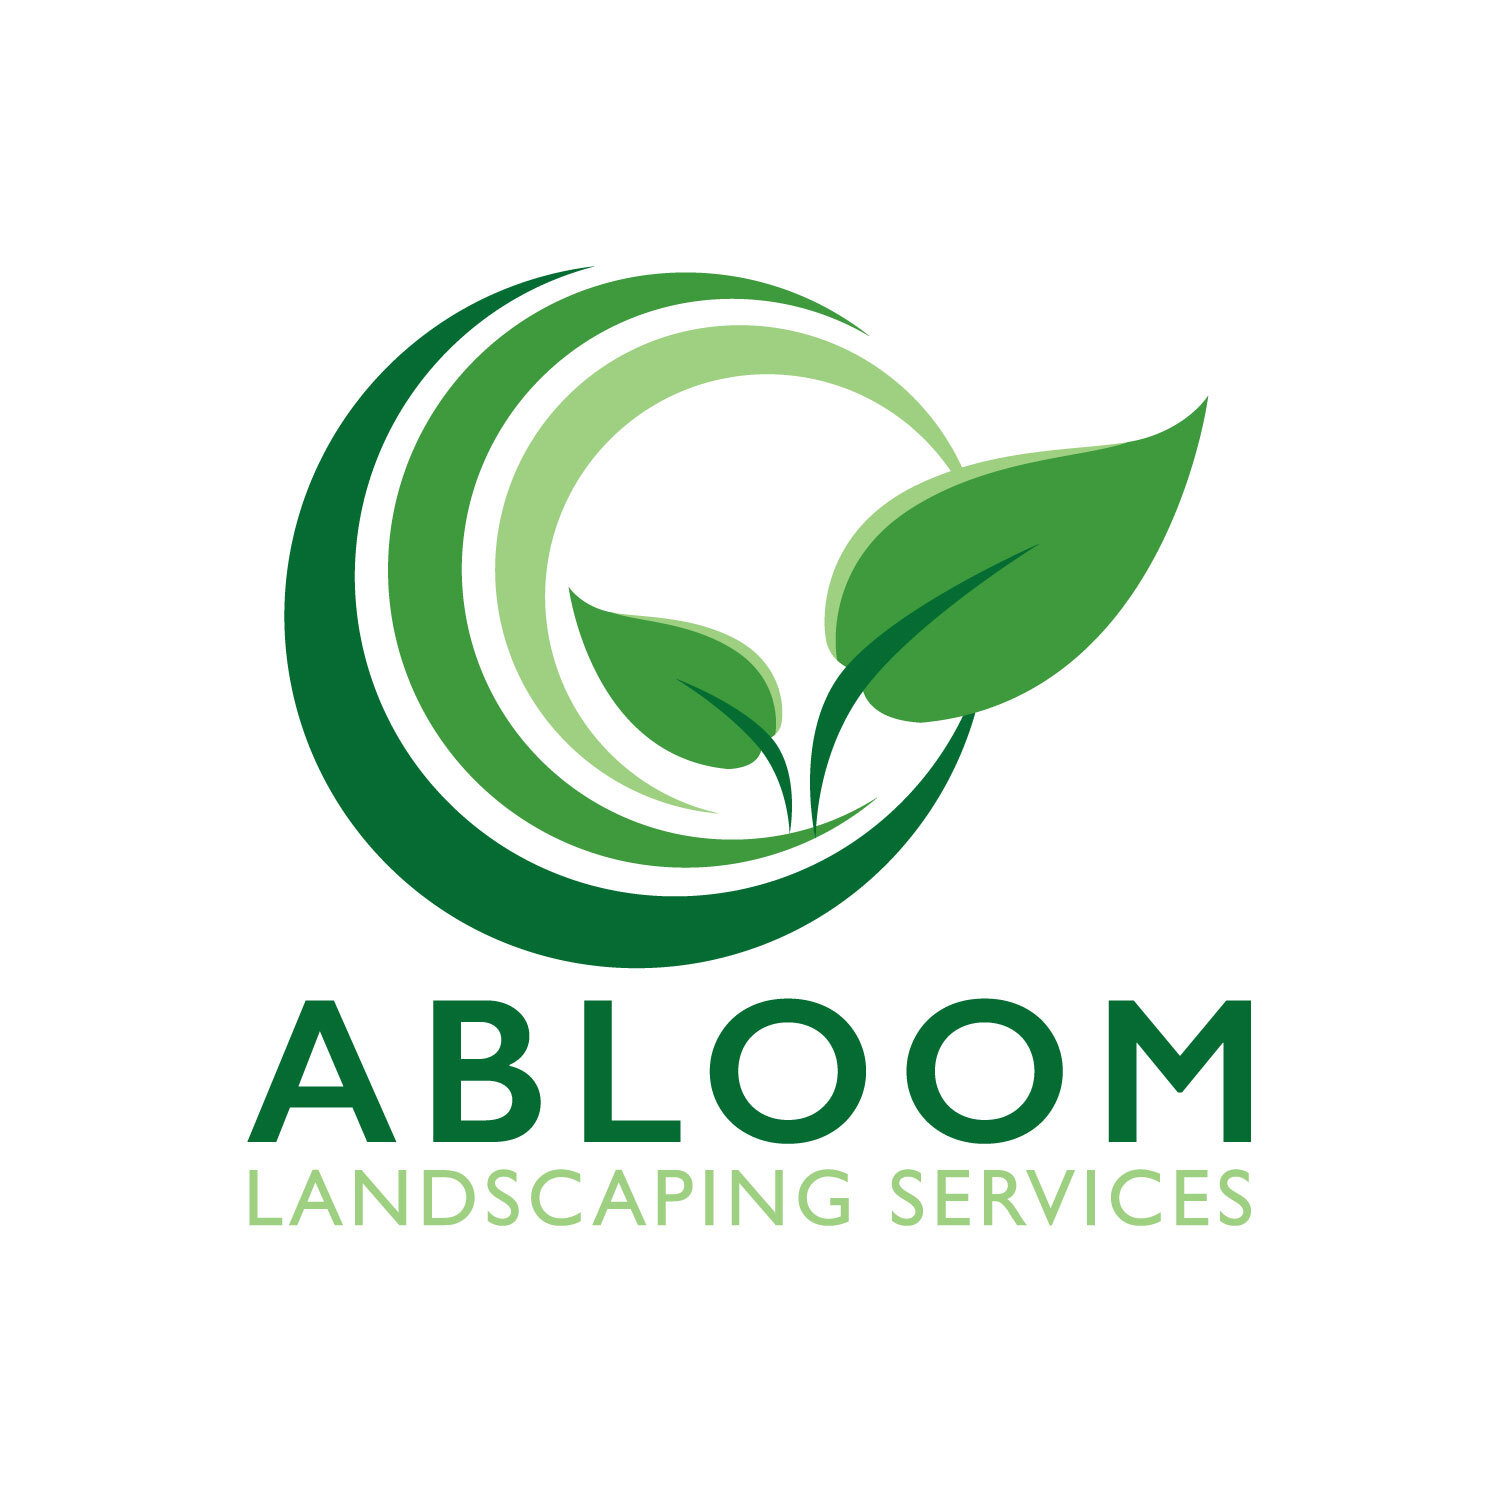 Abloom Landscaping Services